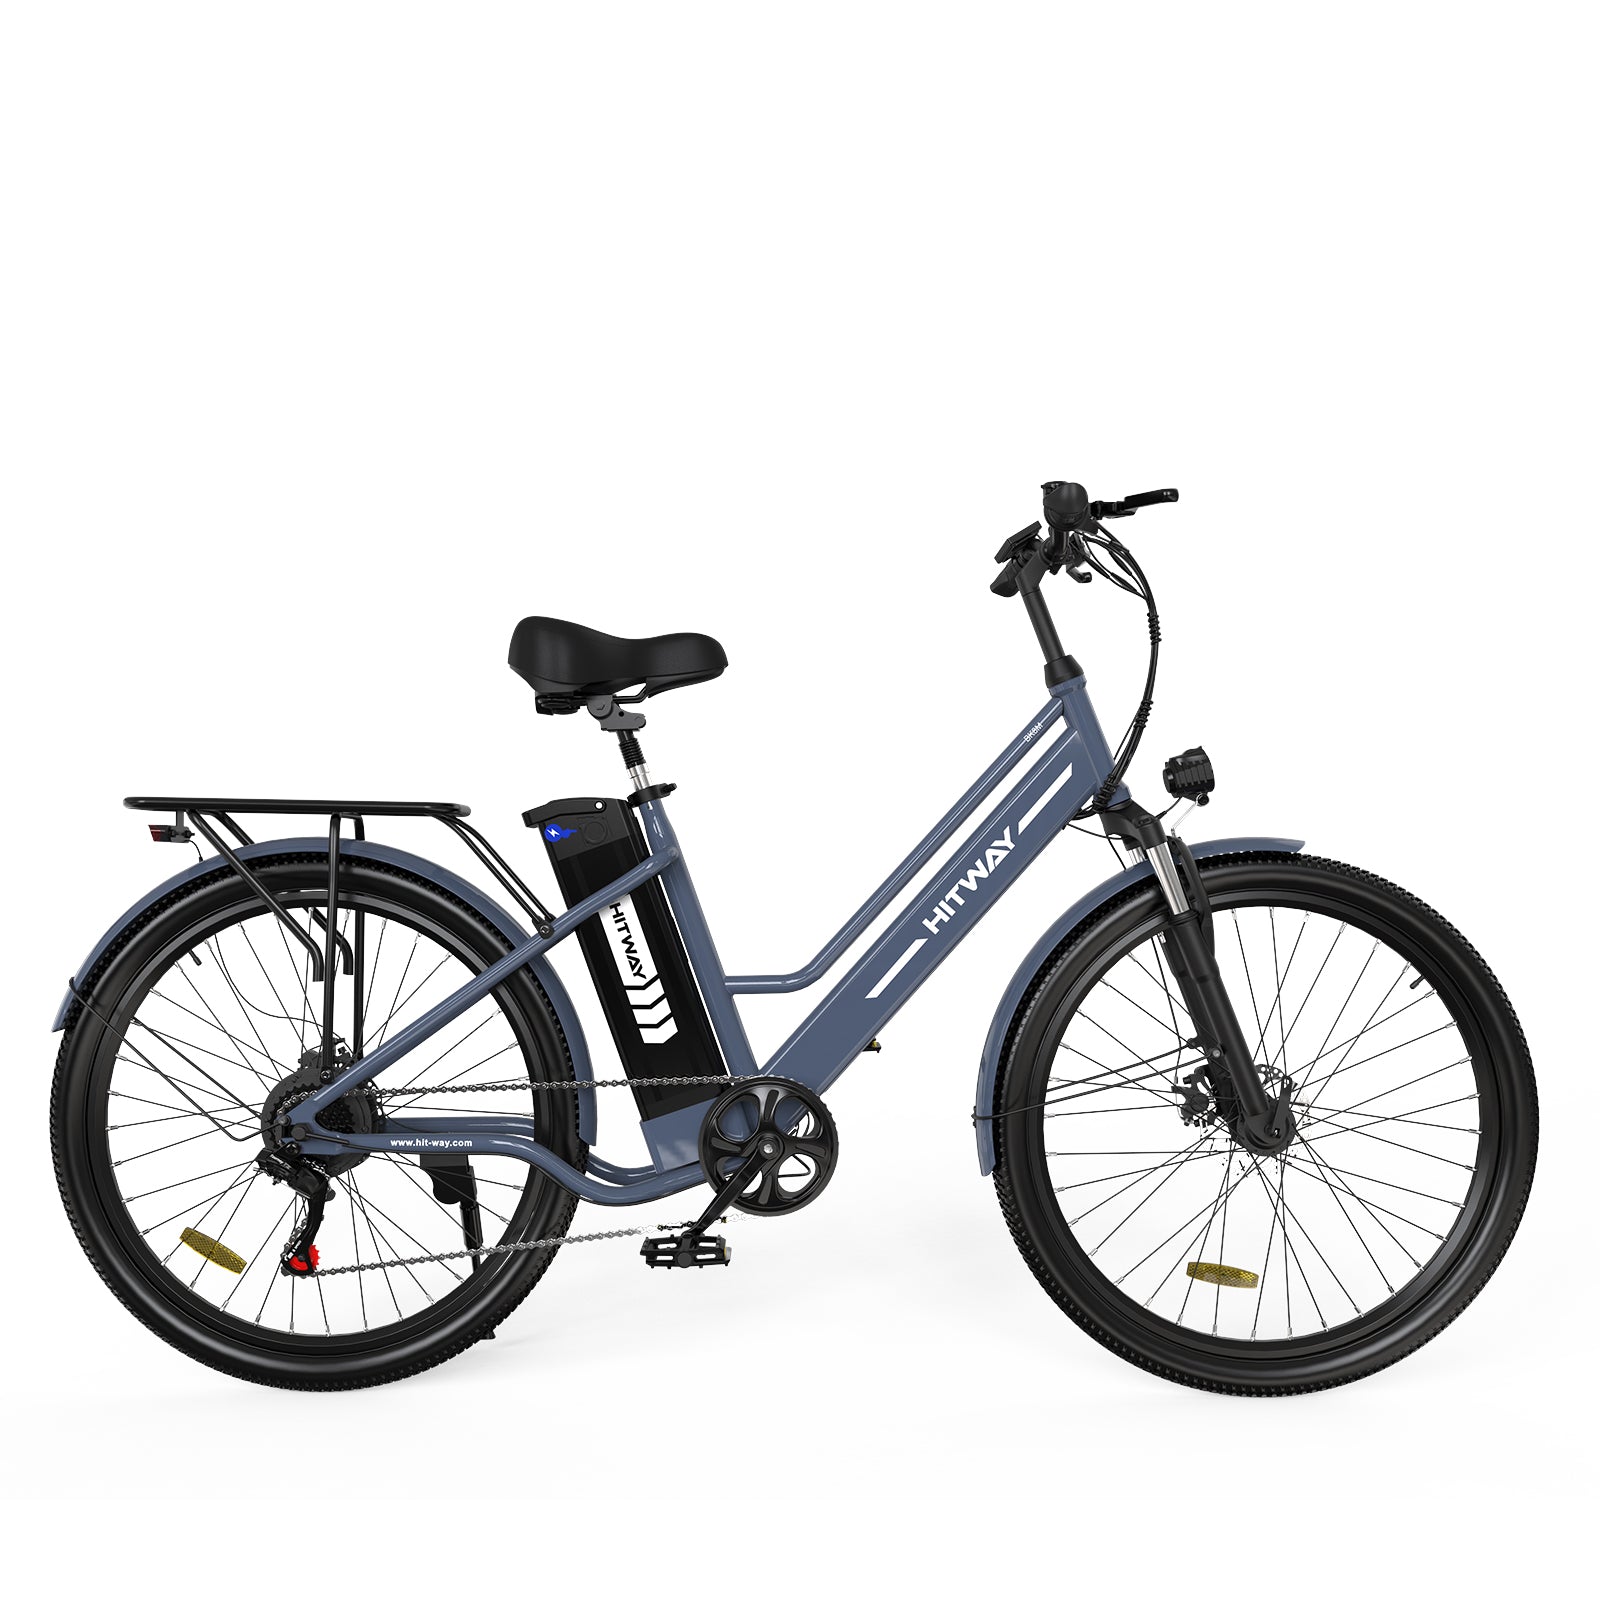 All Ebikes - HITWAY Ebikes - Free Shipping & 30-Day Return